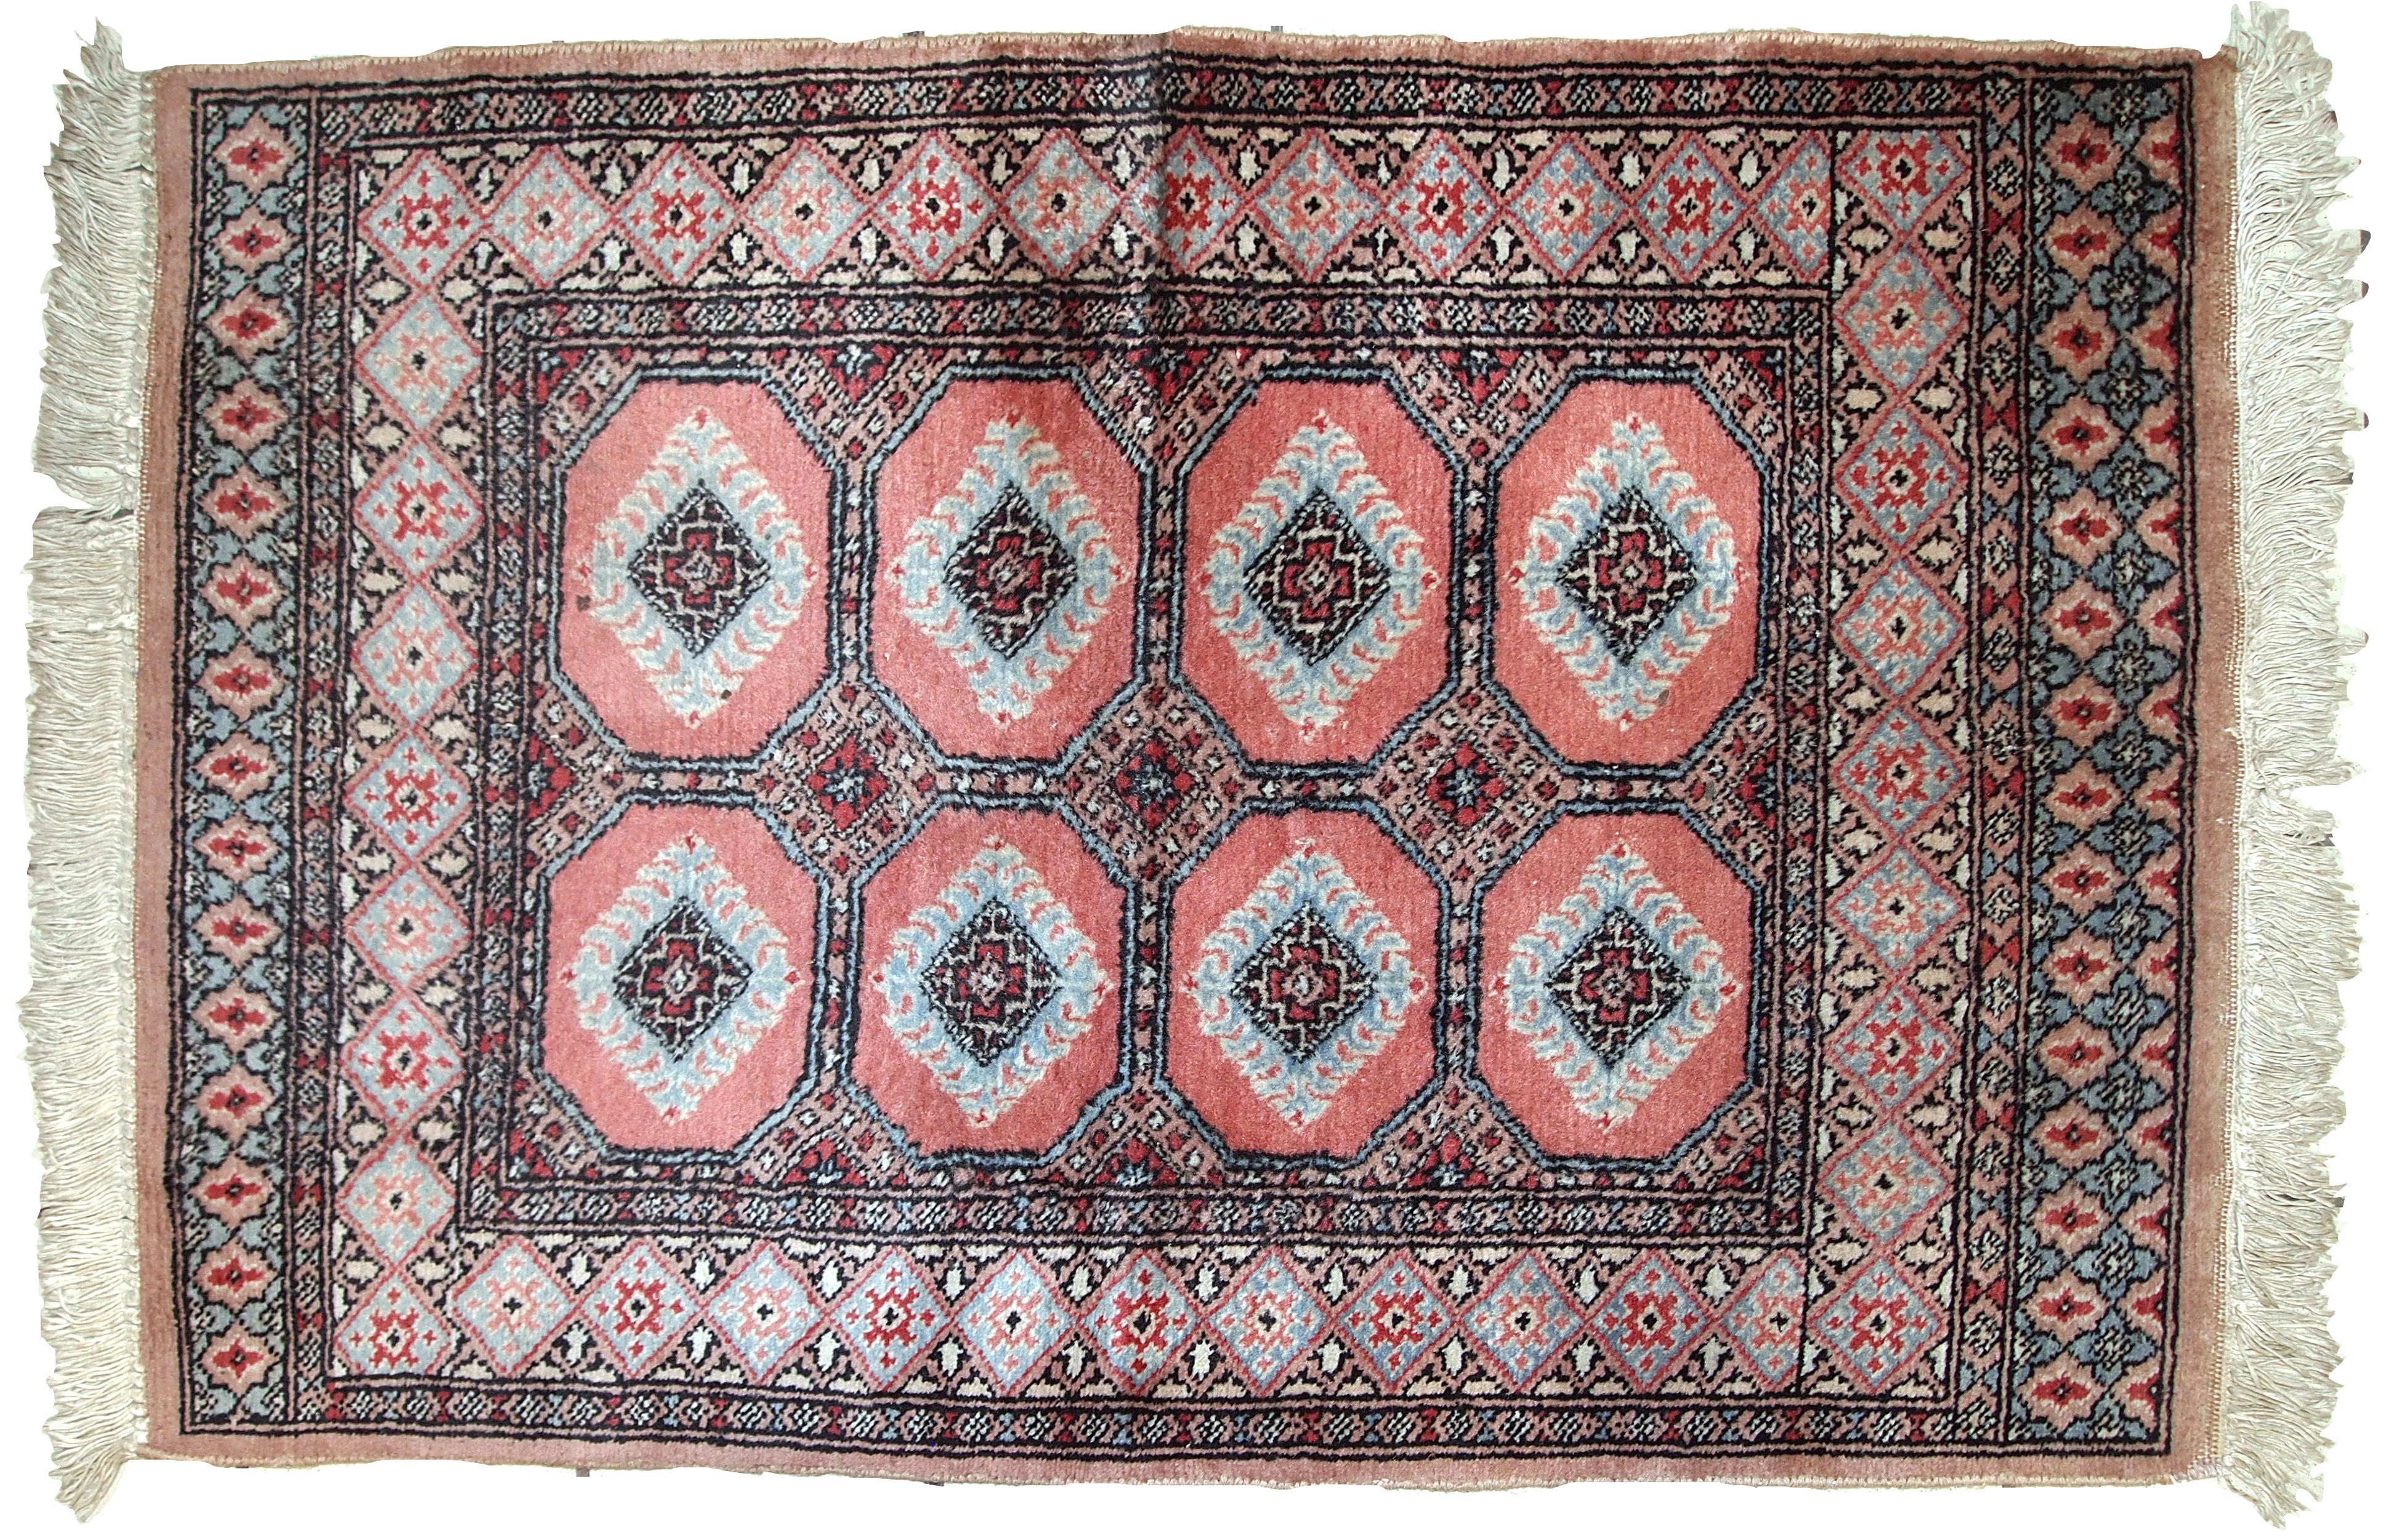 Handmade vintage Uzbek rug in pink and sky blue wool. It has been made in the middle of 20th century in Central Asia.

?-condition: original good,

-circa 1960s,

-size: 2.6' x 3.8' (81cm x 118cm),

-material: wool,

-country of origin: